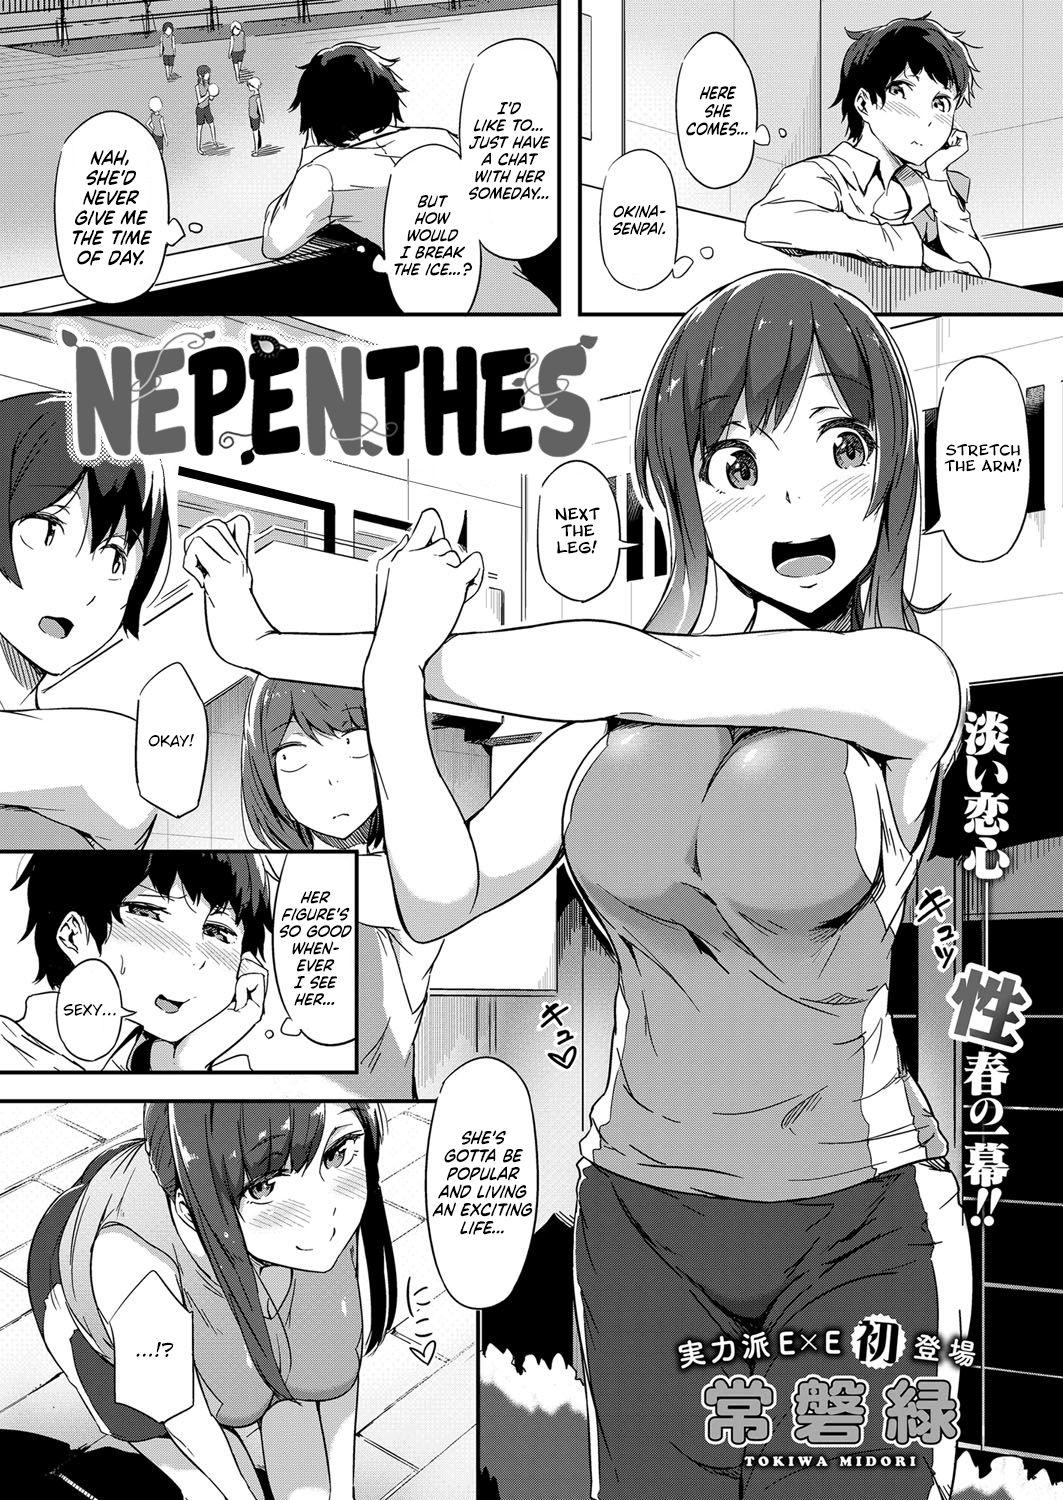 Teensex Nepenthes Blowjob - Page 1